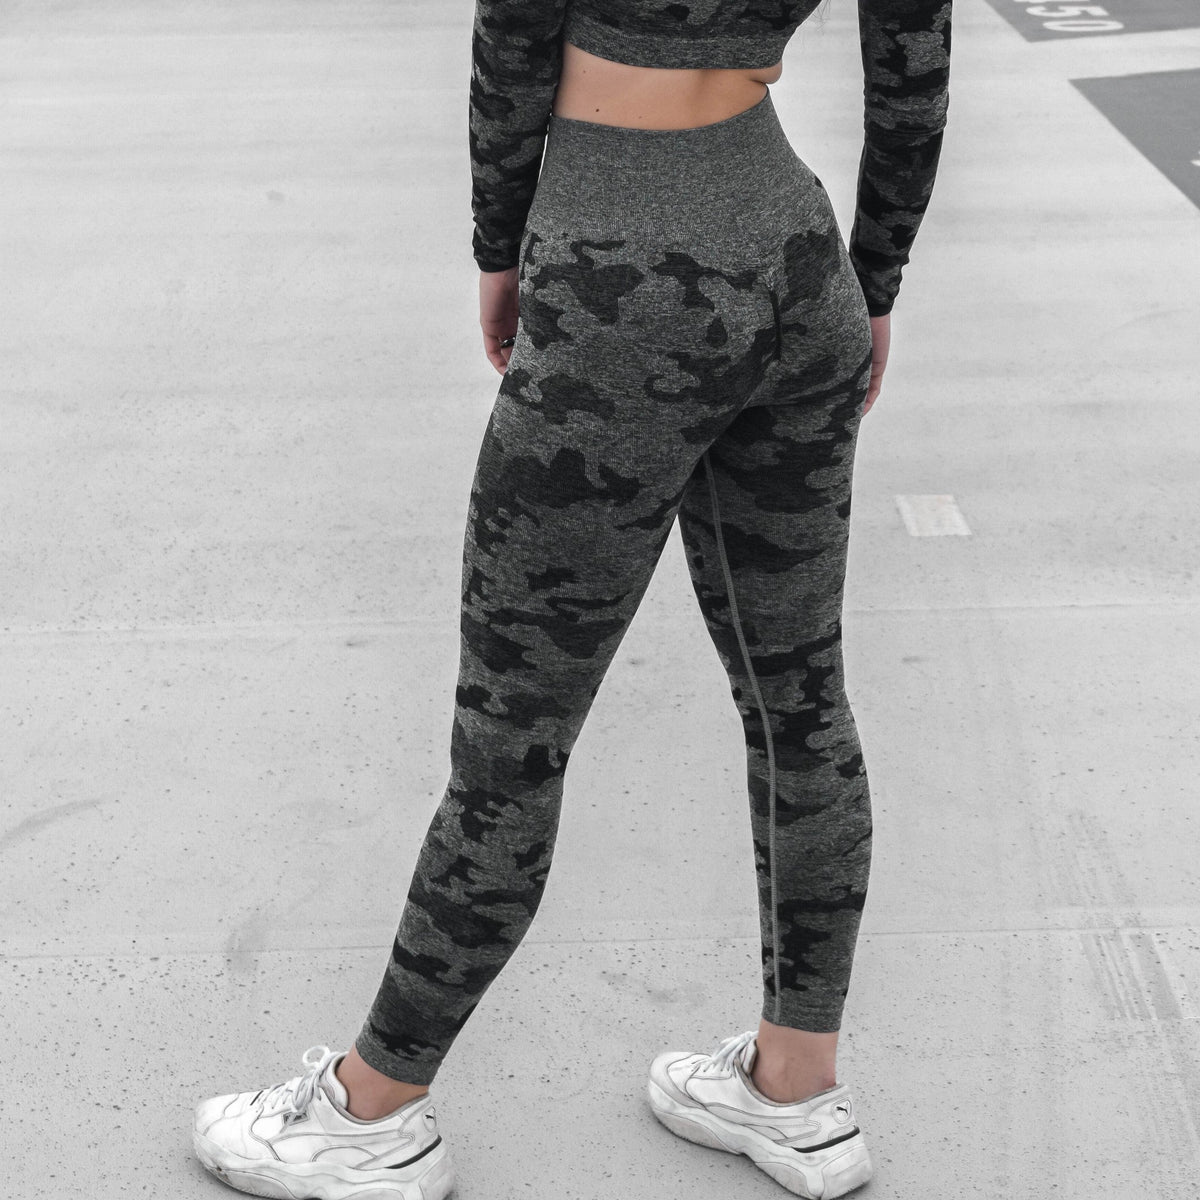 Classic Camo Leggings by Stylish AF Fitness Co